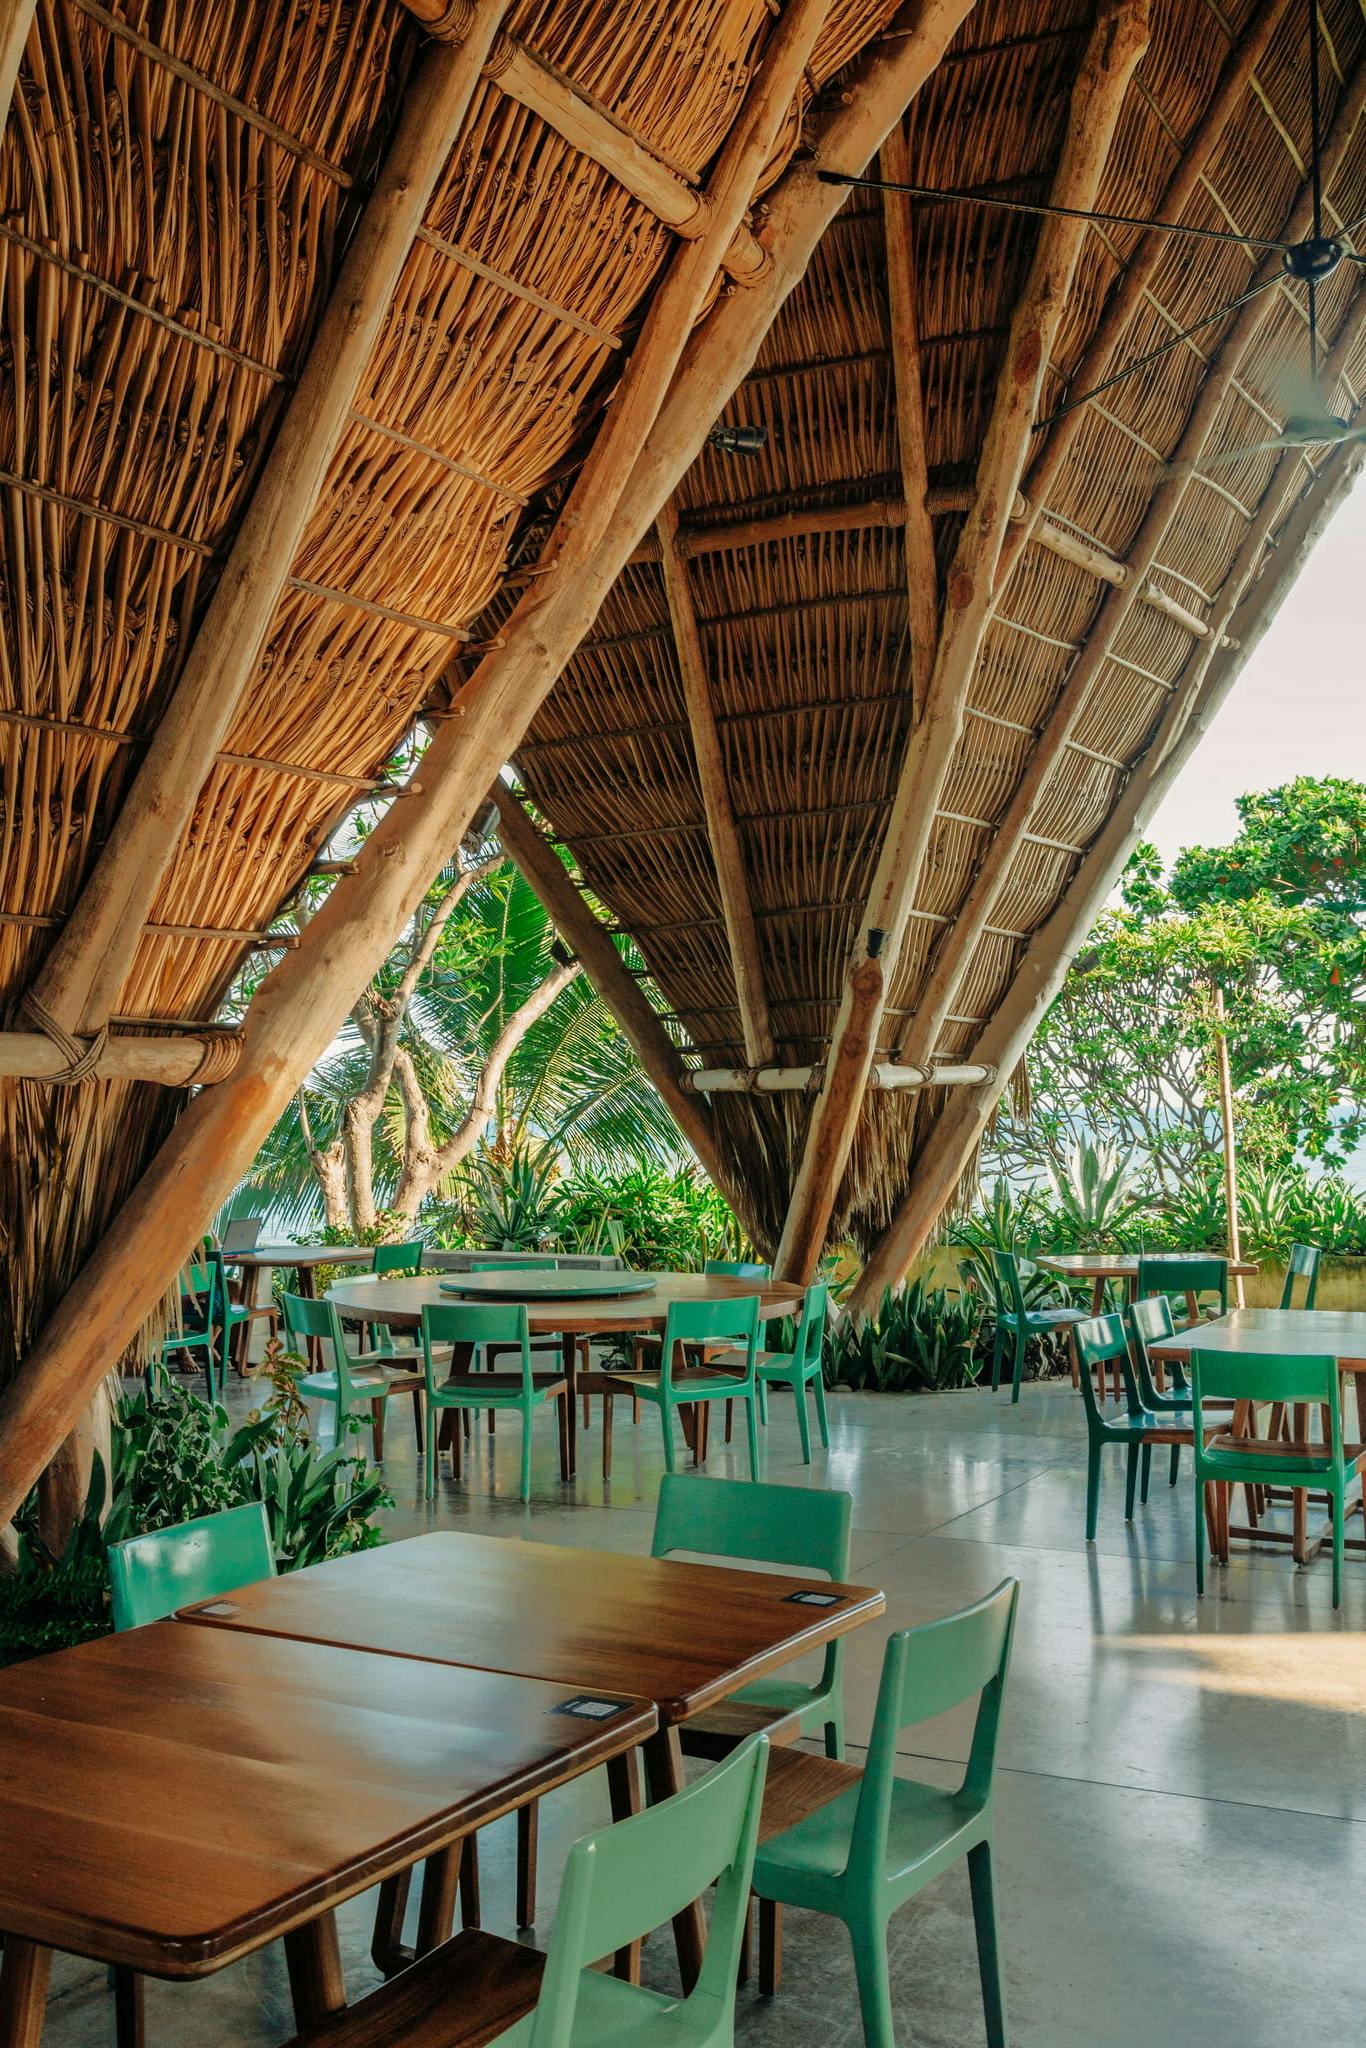 A restaurant with a thatched roof, offering a rustic ambiance and natural charm.